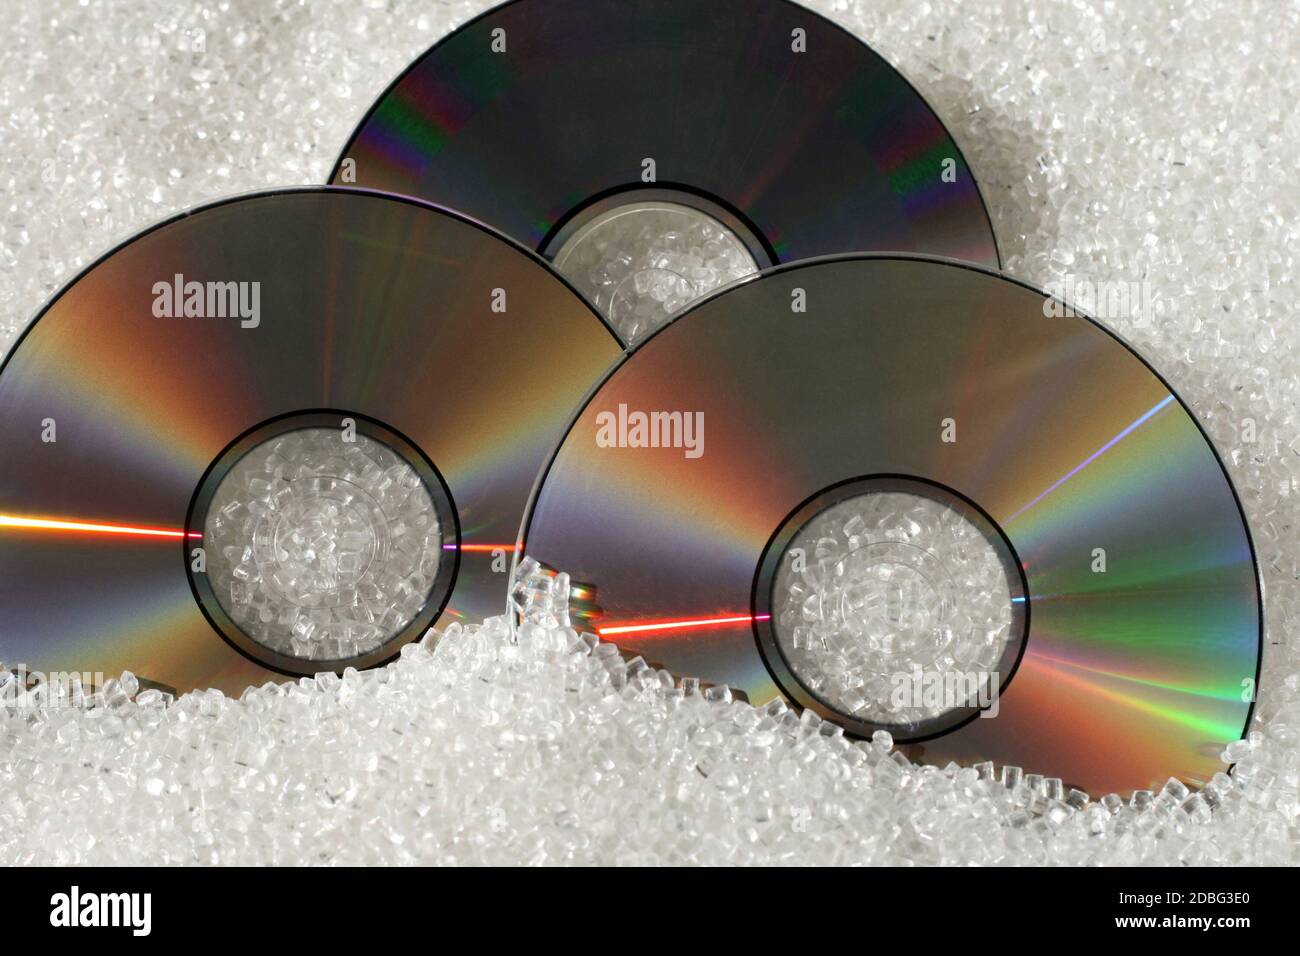 Three DVD disks with plastic granulate material Stock Photo